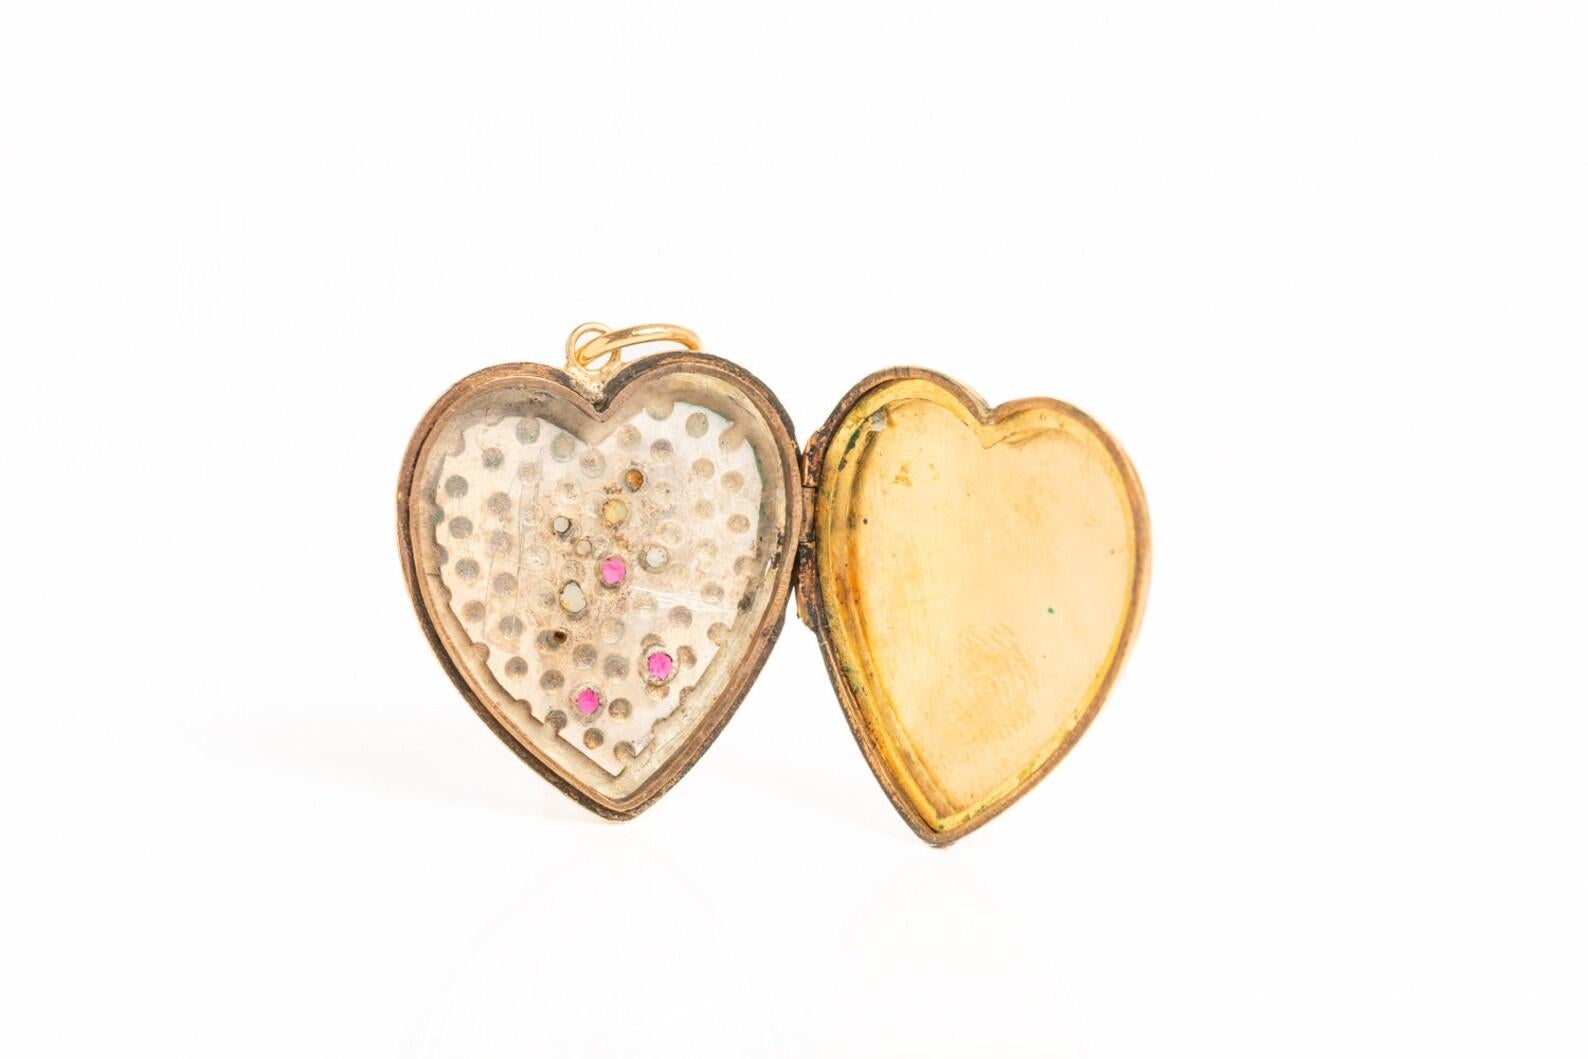 Antique Cushion Cut  Victorian 9ct Front and Back Gold Heart Locket With Pearls and Rubies